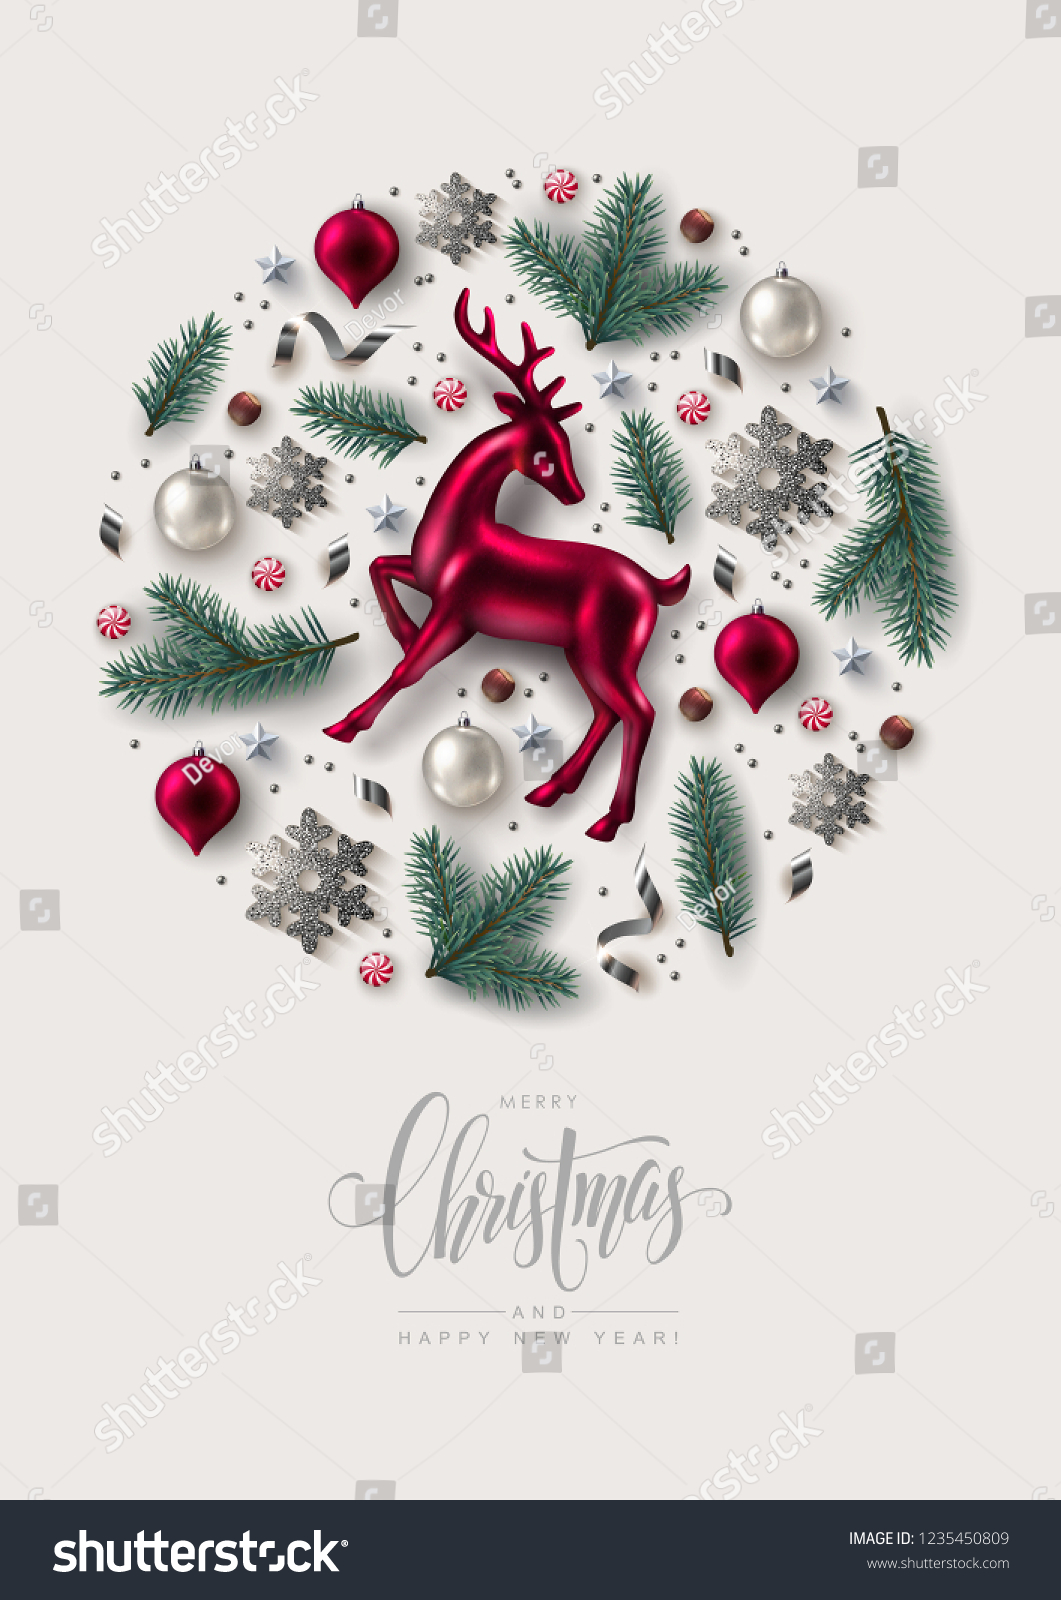 Round Christmas Composition made of Pine Branches, Ornaments, Snowflakes, Confetti and Glass Reindeer.  Flat lay, top view. #1235450809